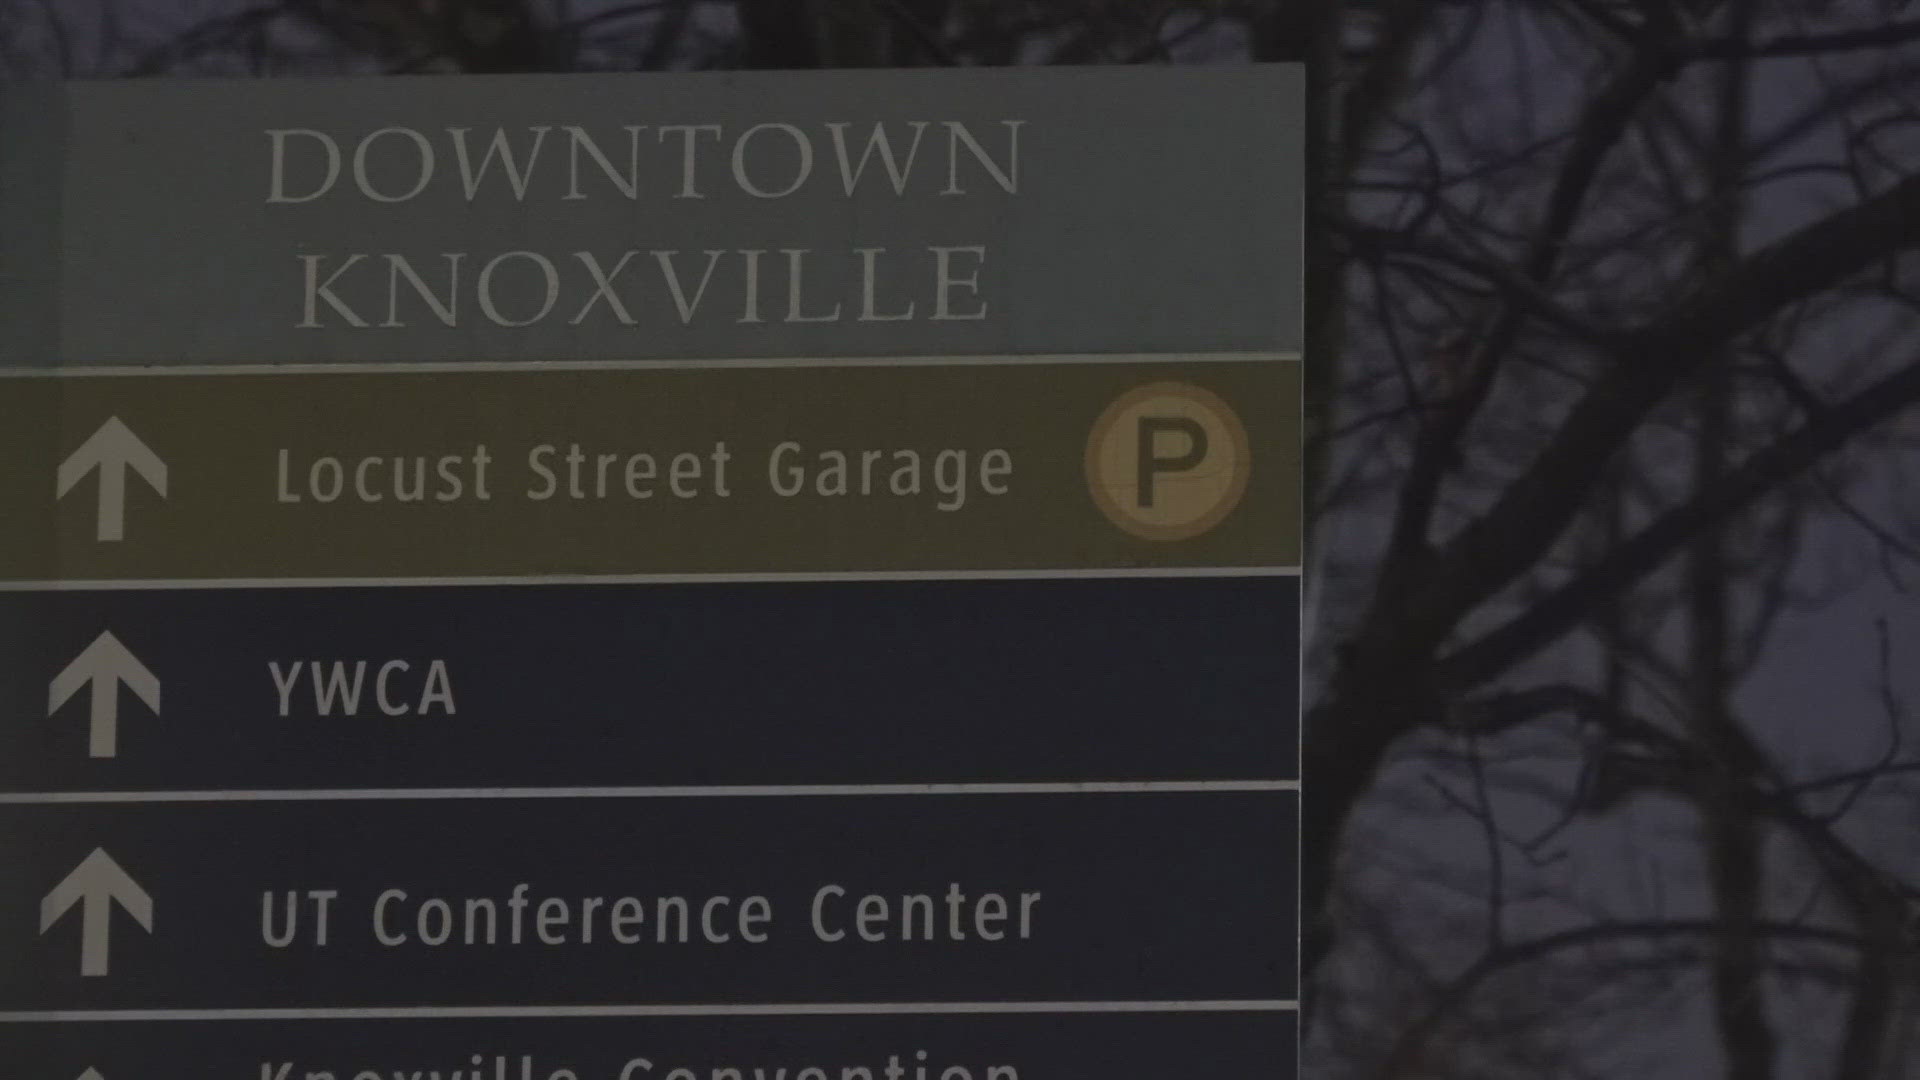 Knoxville leaders said an online portal is open on the city's website, allowing people to weigh in on future plans.